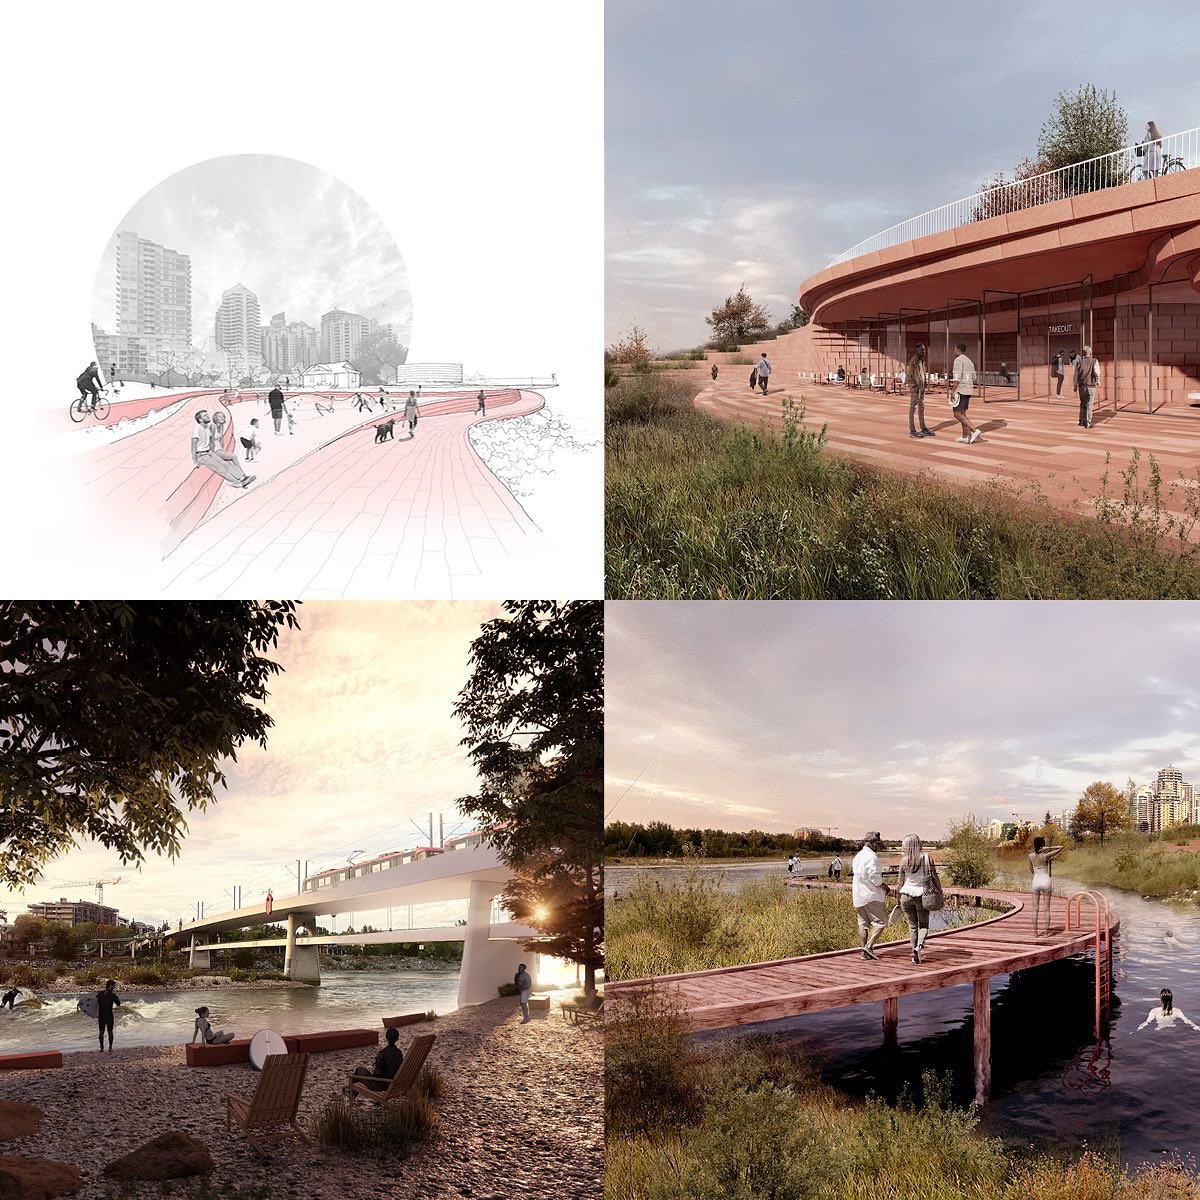 We are thrilled to announce that our design for RiverWalk West has been awarded an RAIC National Design Award. Click the link in the bio for more info.

In collaboration with @groundcubed,&nbsp;@martinsongolly,&nbsp;@rjc_engineers,&nbsp;@jaredtailfea